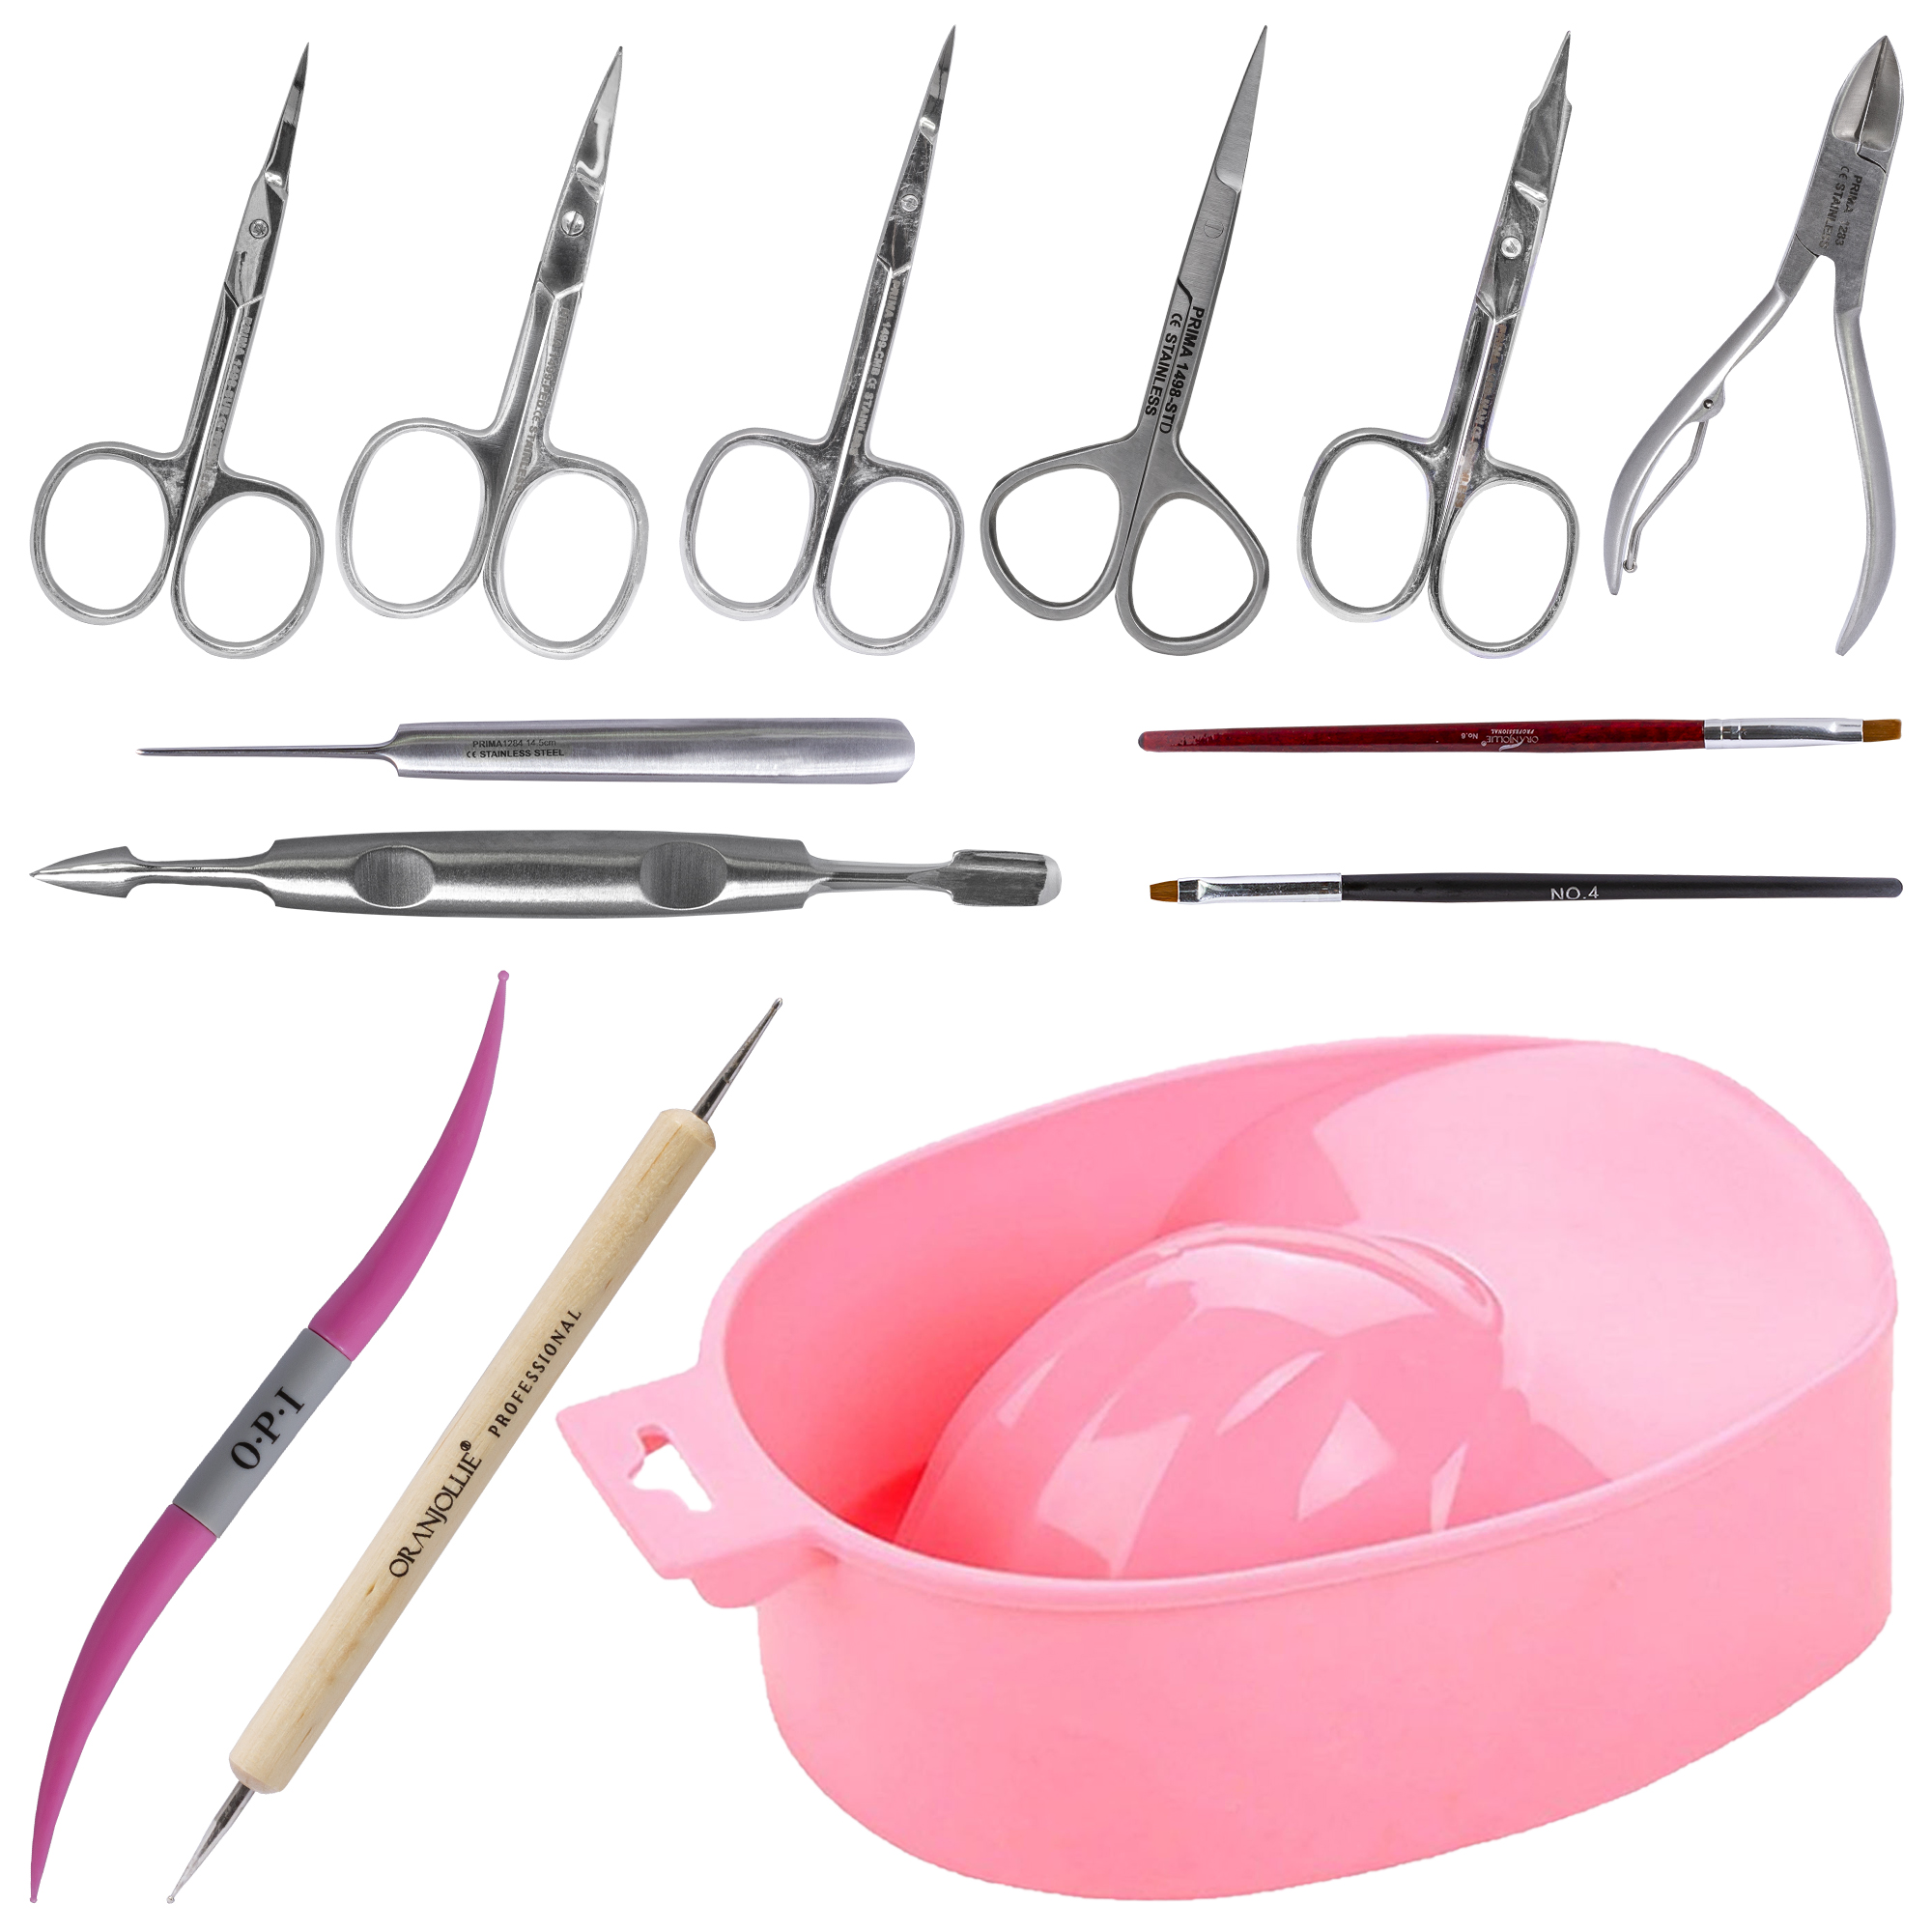 Cosmetic SPA/MANICURE AND PEDICURE PRODUCTS/Manicure and Pedicure Instruments